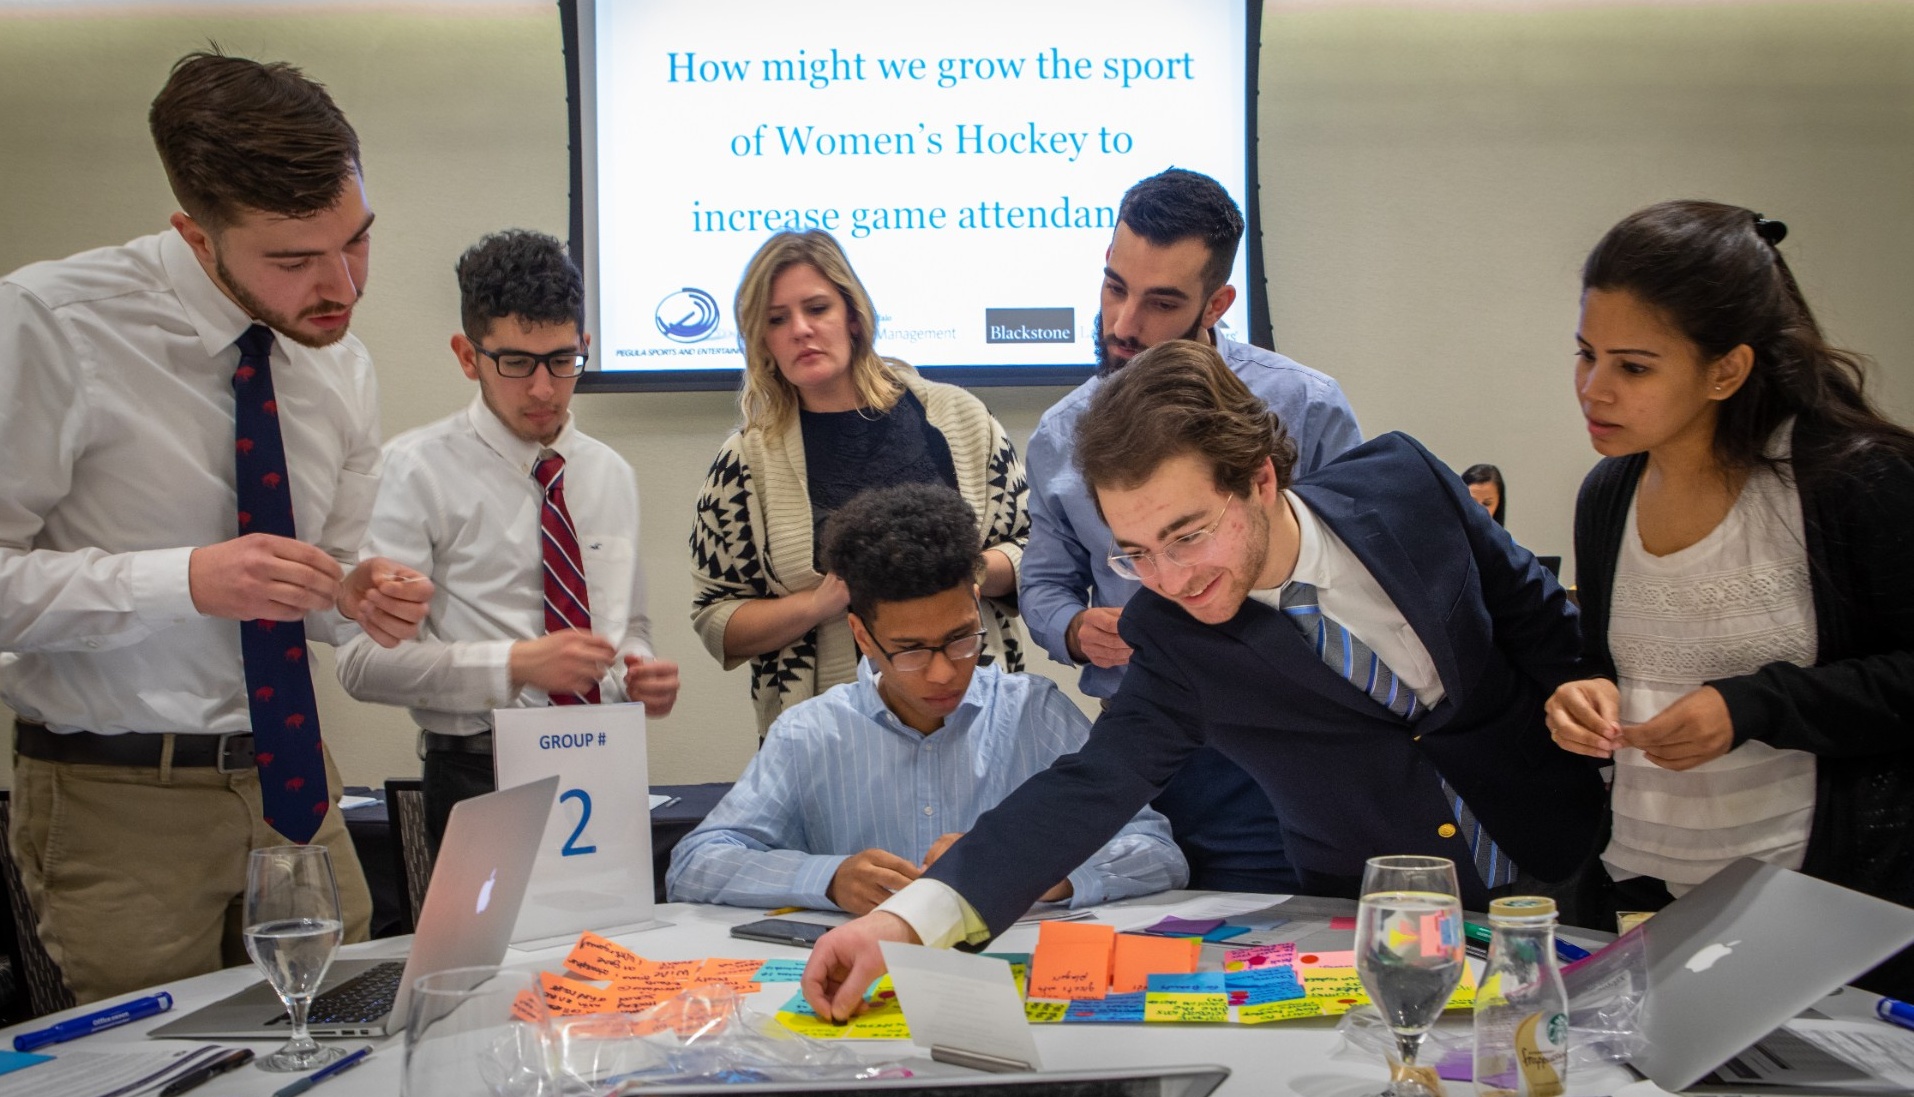 UB Students participated in an Innovation Sprint sponsored by UB’s Blackstone LaunchPad powered by Techstars at the Buffalo Marriott Harborcenter. They worked on ideas for how to increase attendance for teams in the National Women’s Hockey League (NWHL). Photographer: Douglas Levere. 